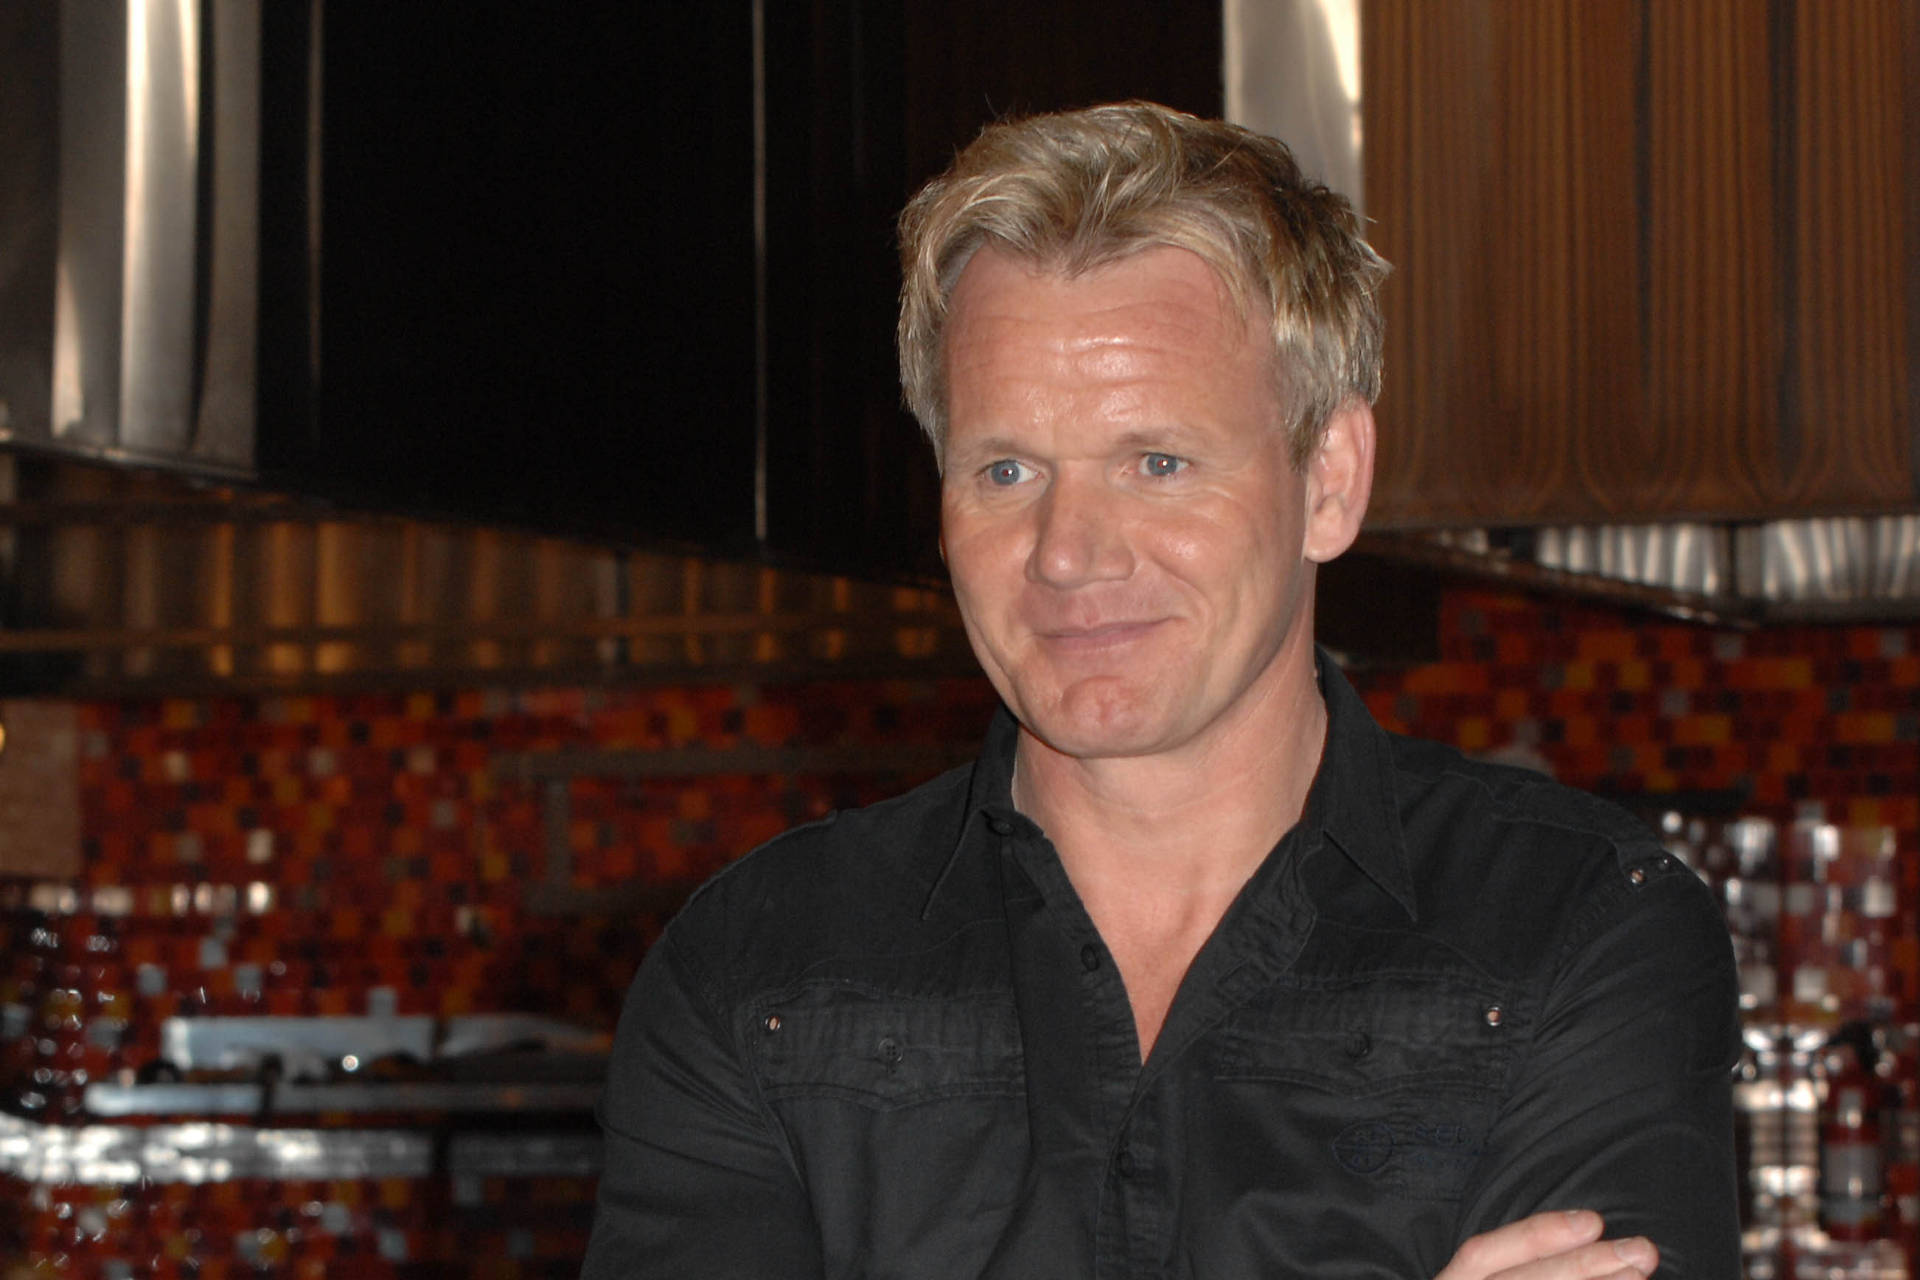 What Lessons Can We Learn from the Famous Gordon Ramsay?